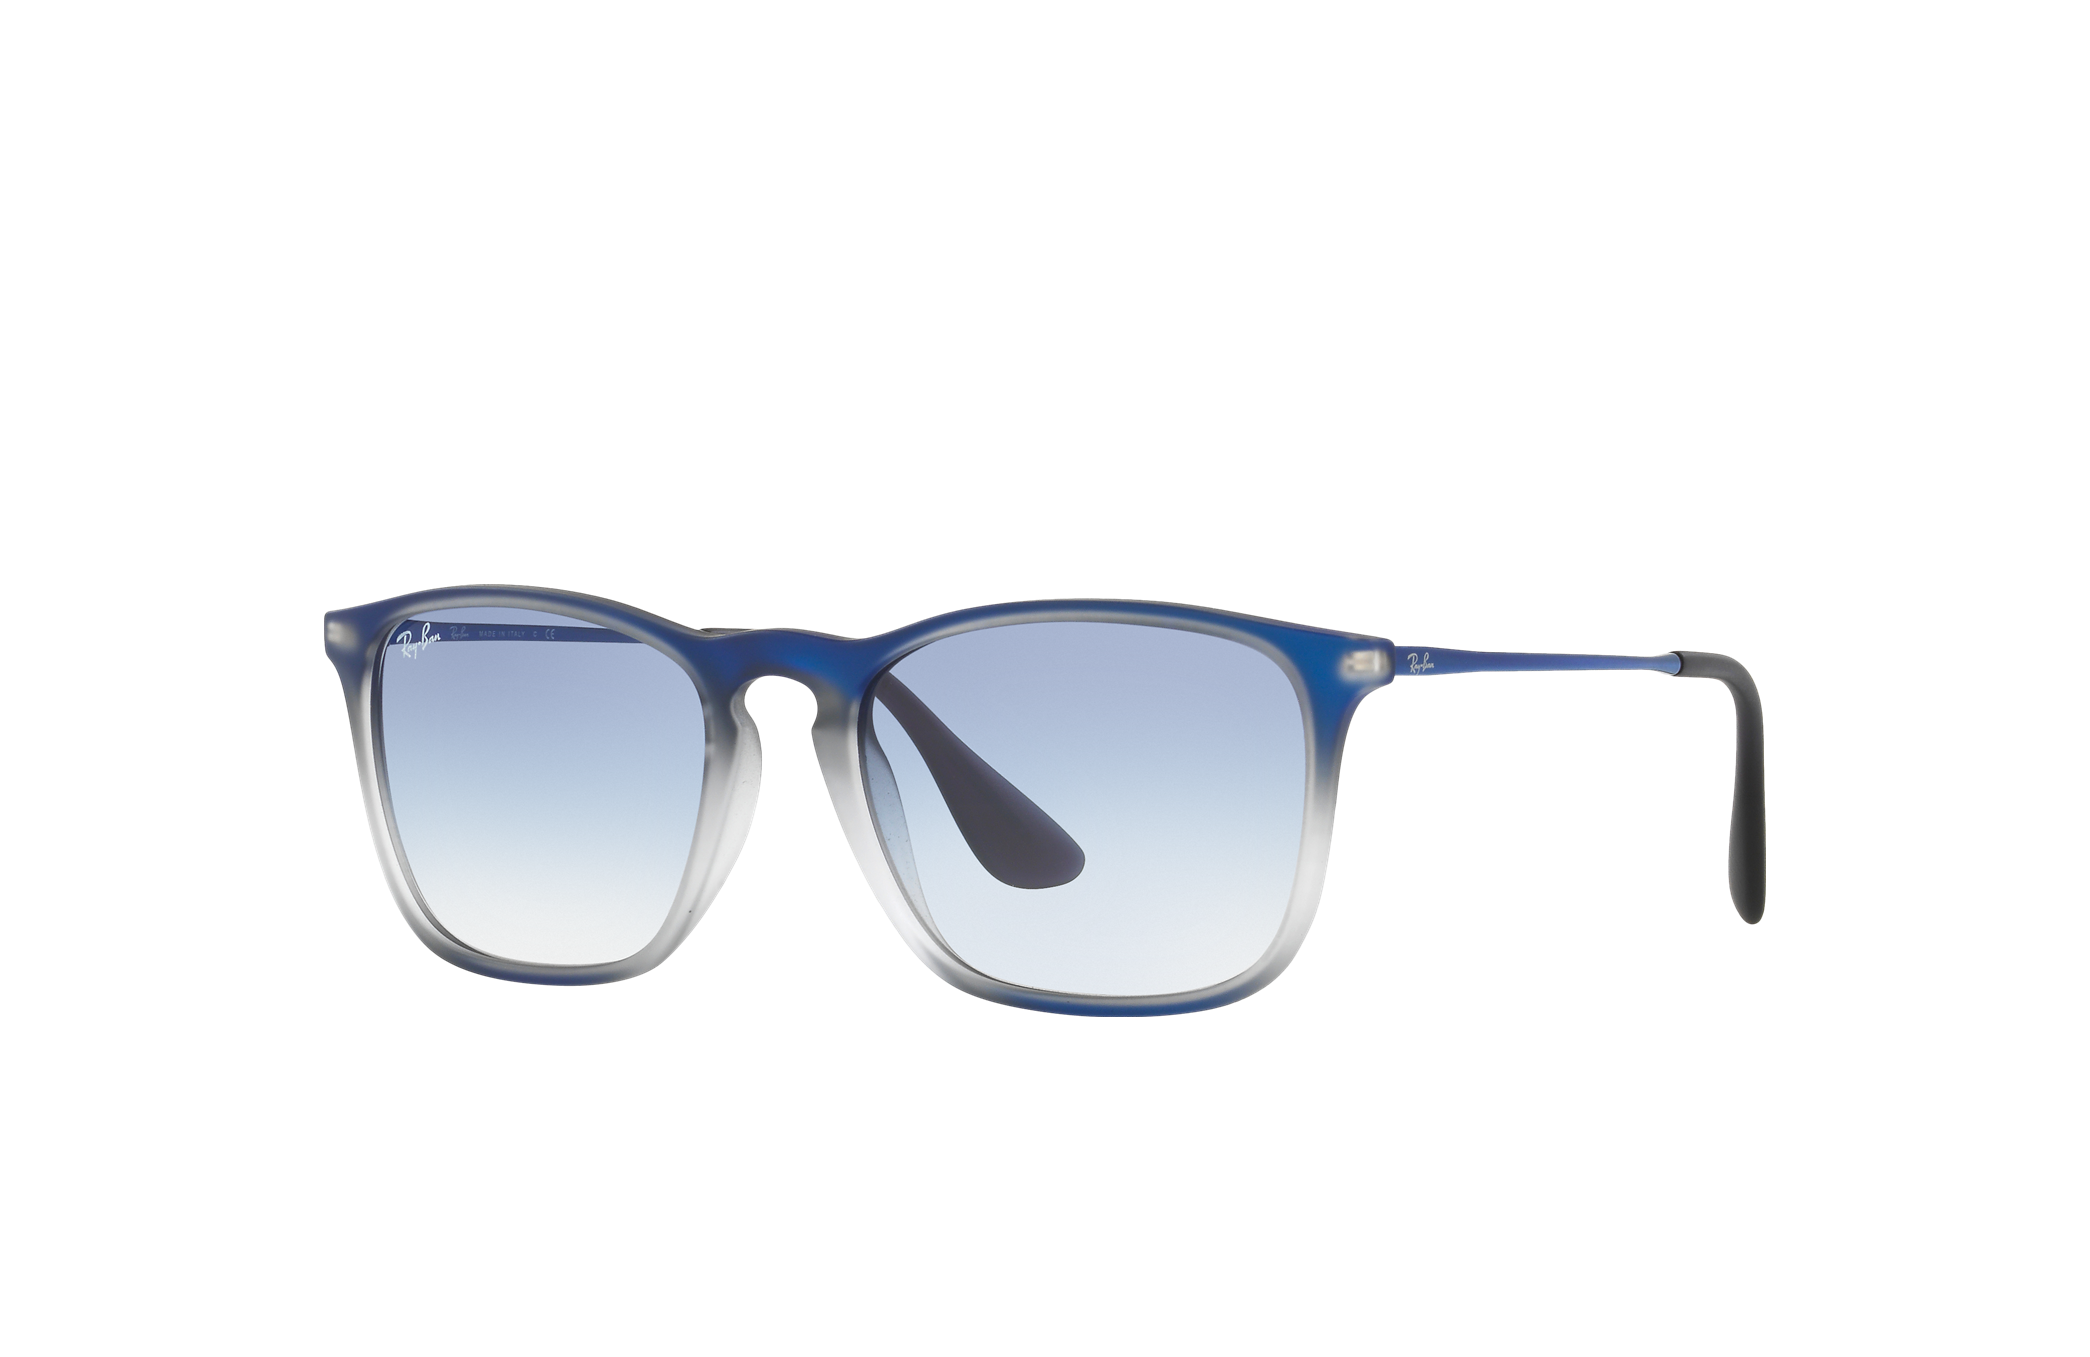 Chris Sunglasses in Blue and Light Blue | Ray-Ban®